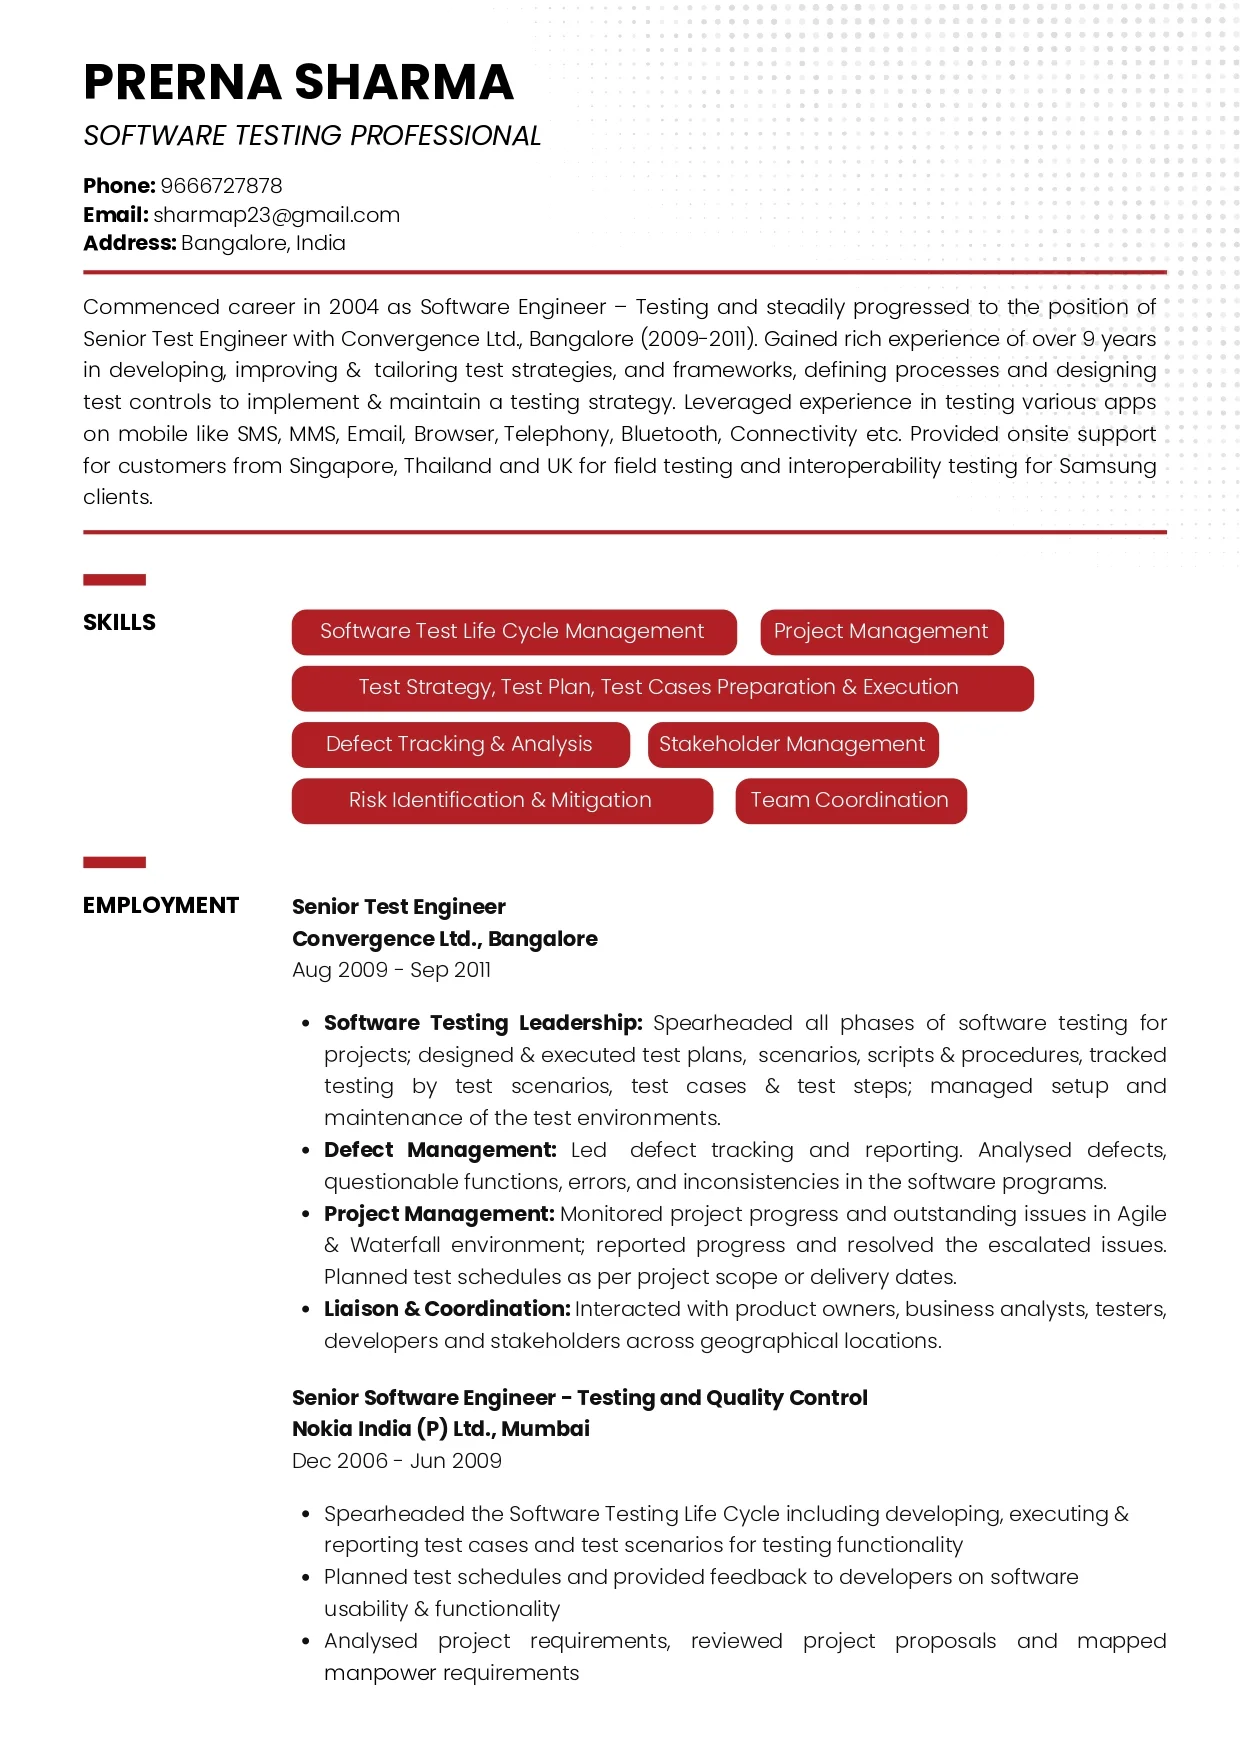 Sample Resume of Software Testing Professional with Career Break | Free Resume Templates & Samples on Resumod.co